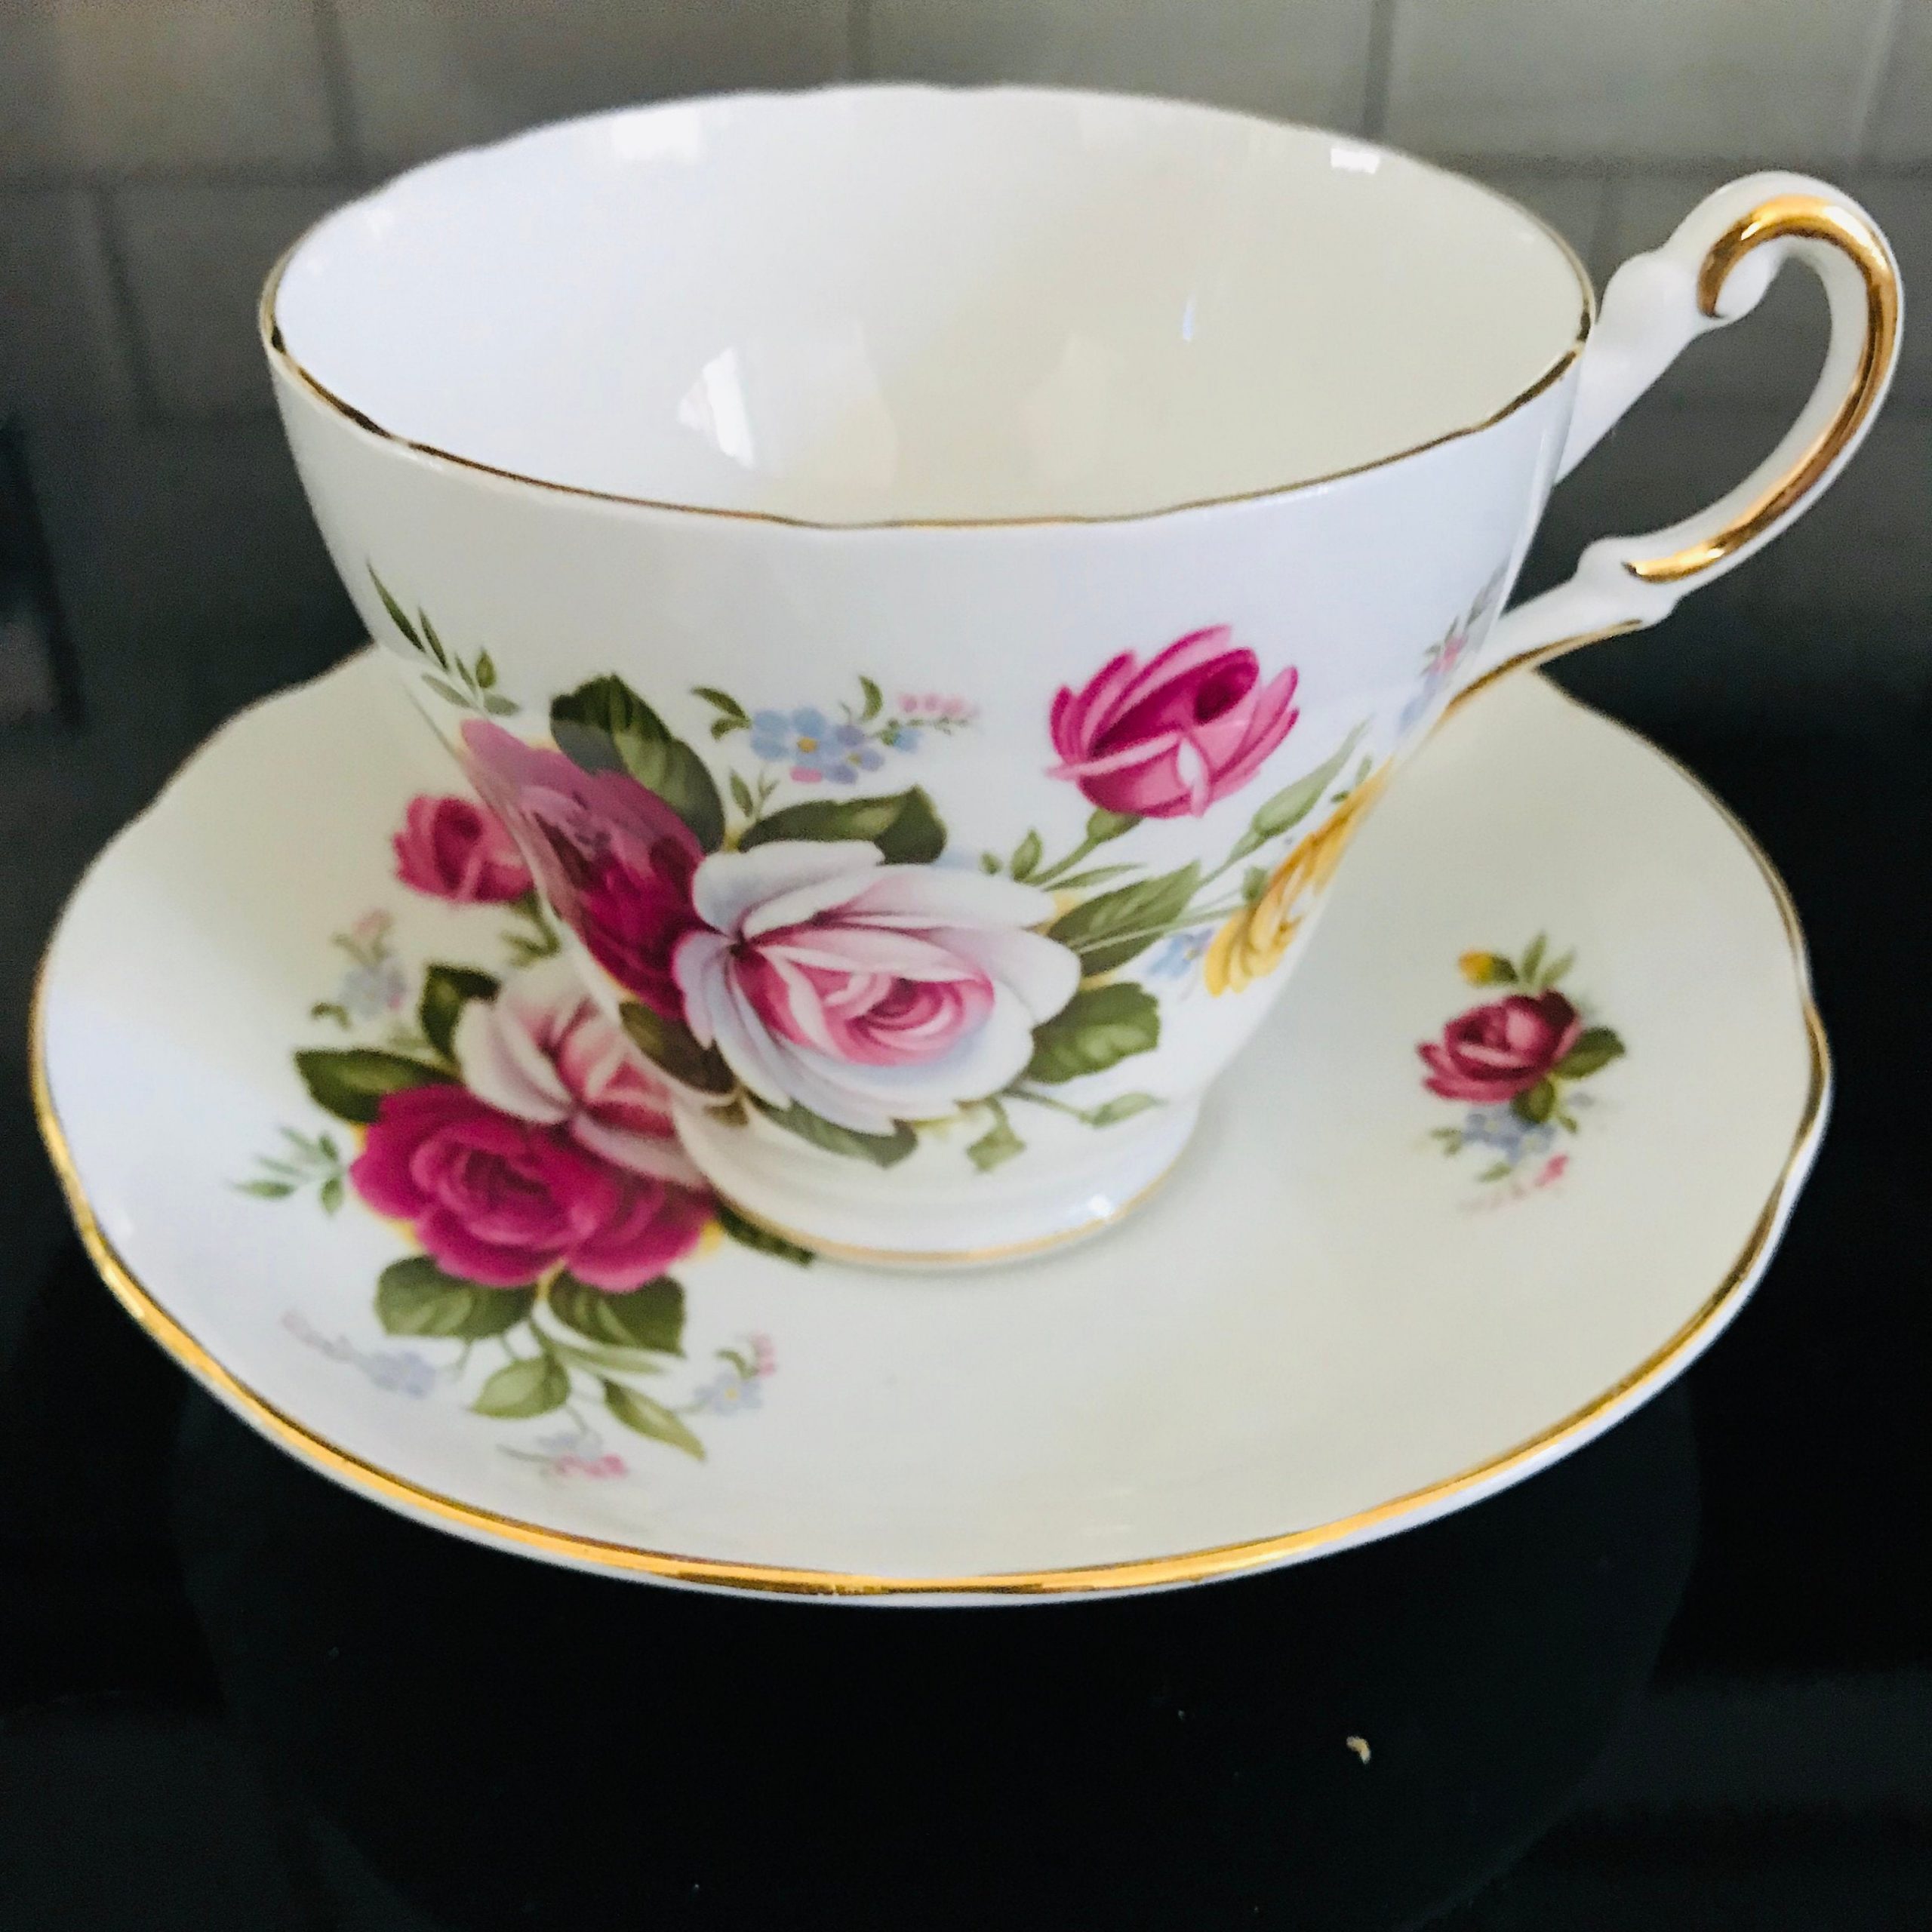 Regency Tea Cup And Saucer England Fine Bone China Red Pink Yellow Roses Gold Trim Farmhouse